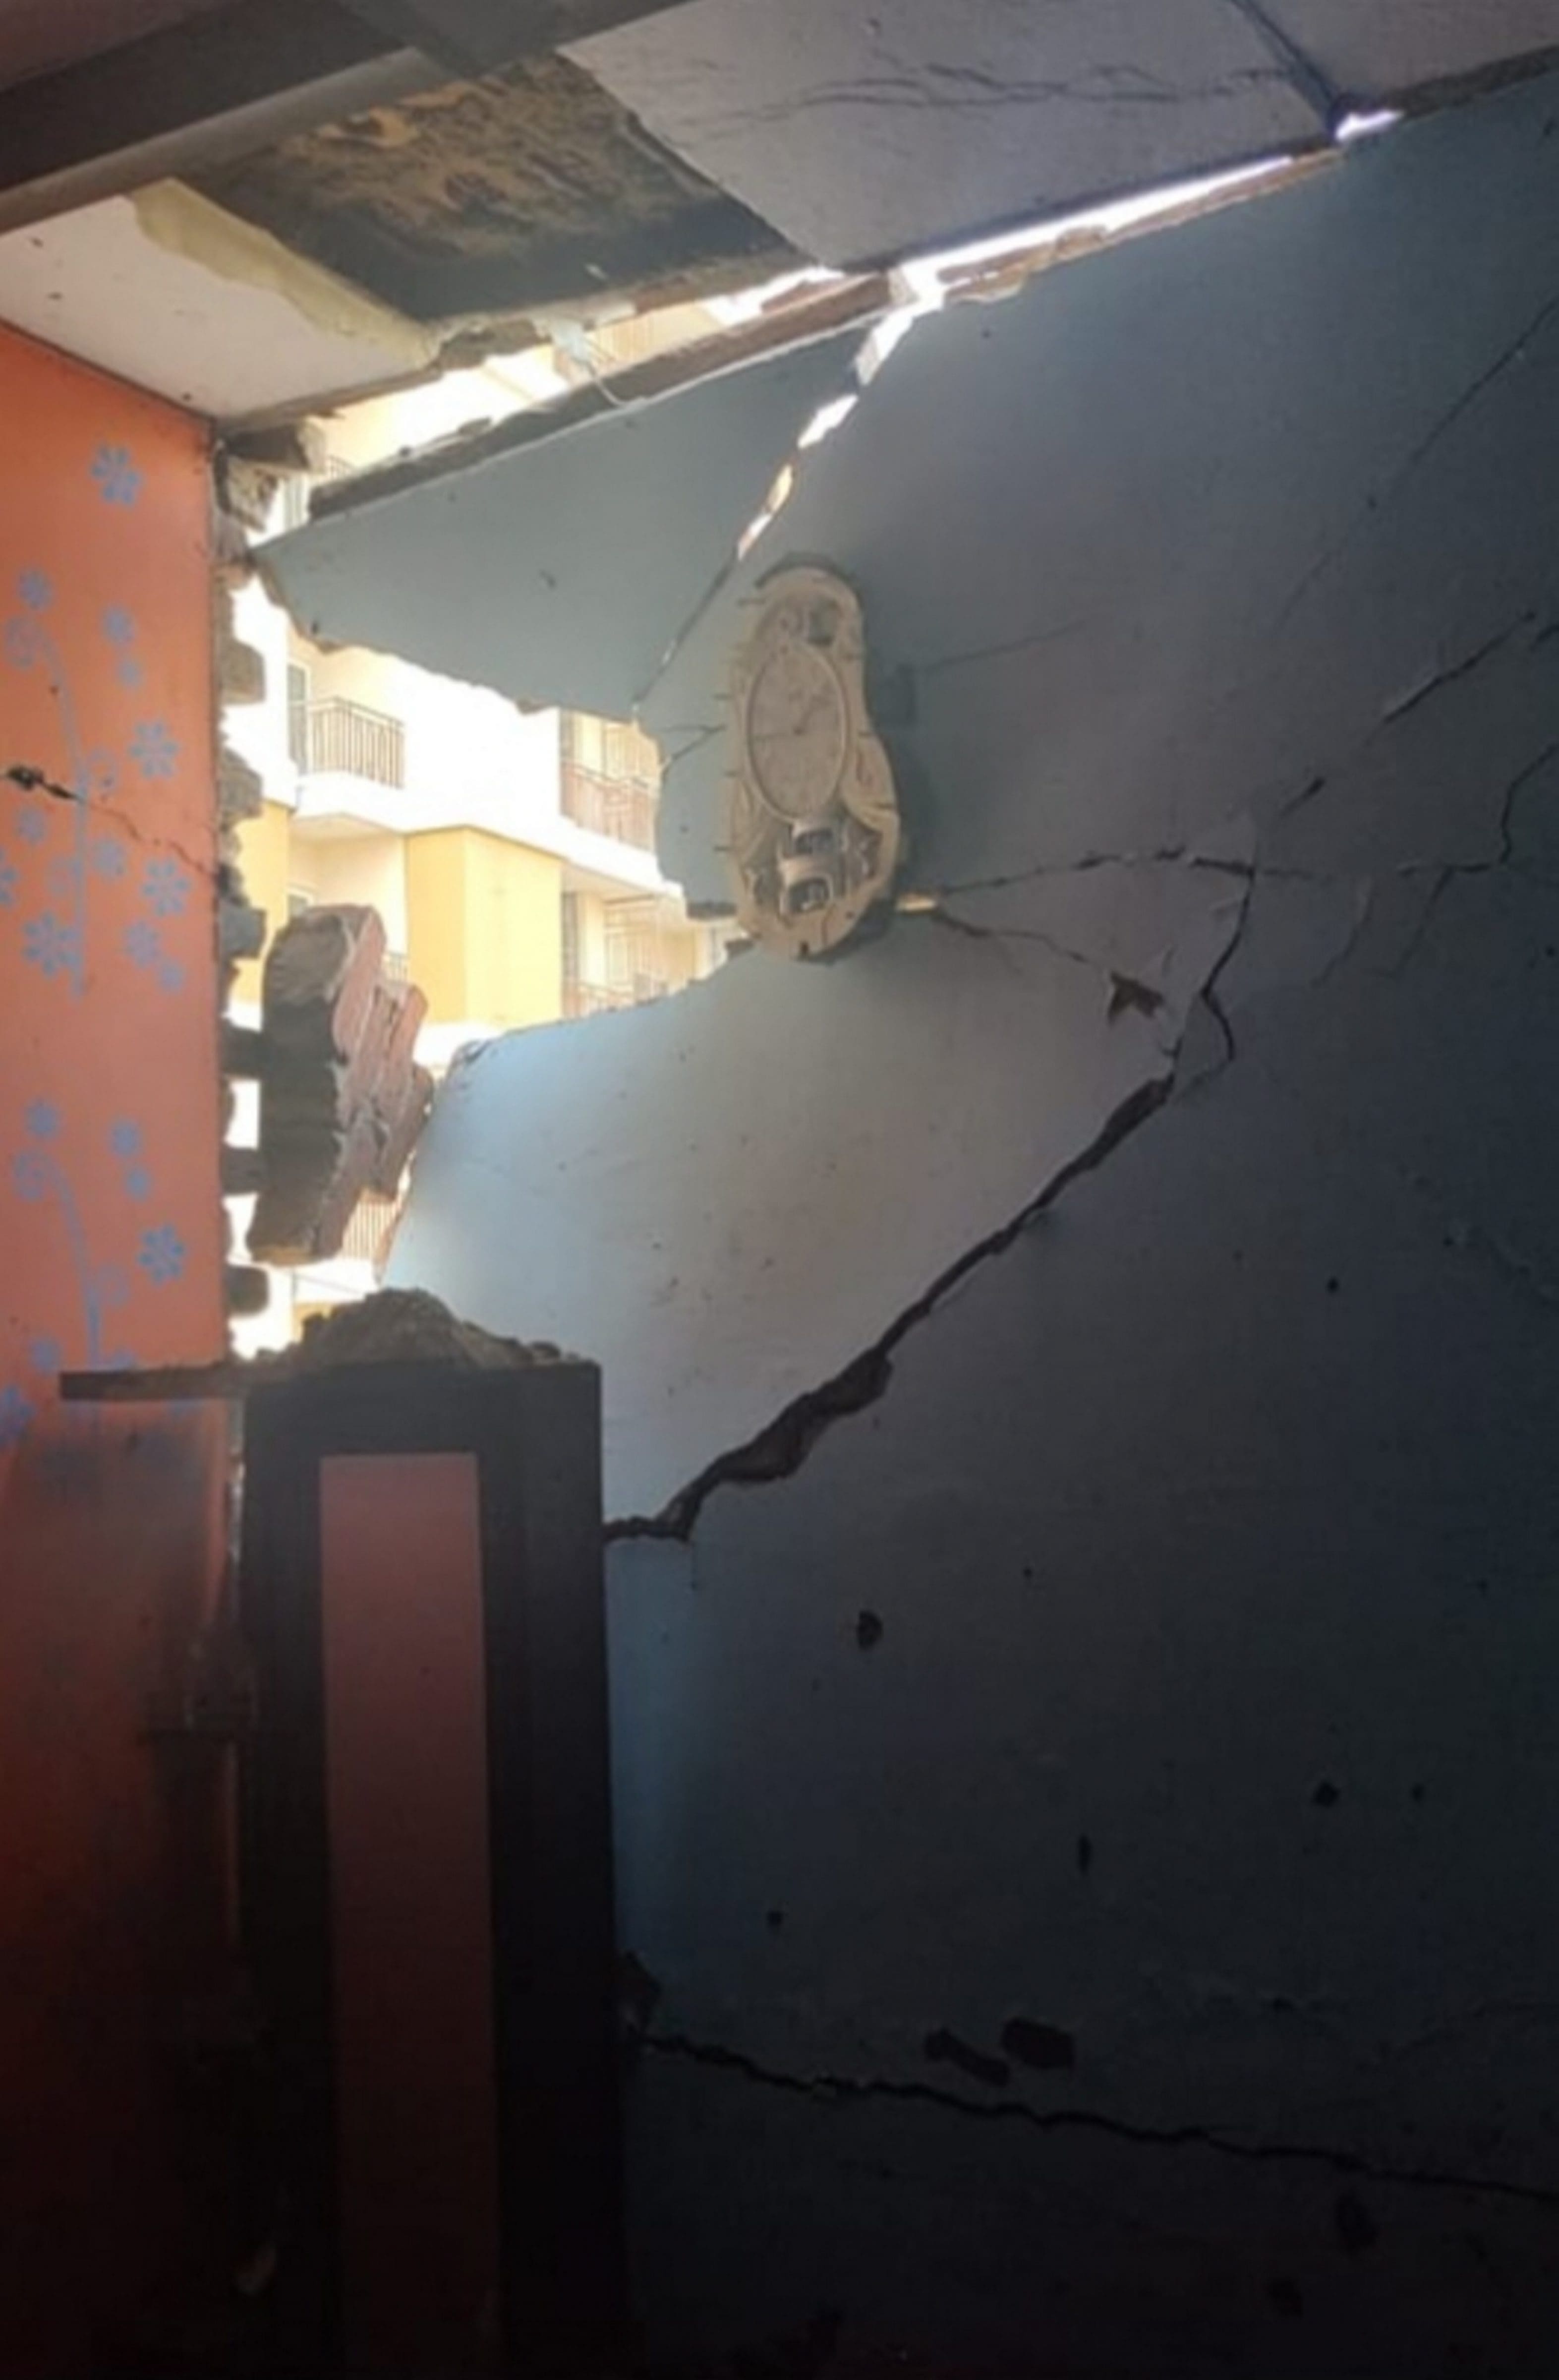 Ghaziabad: Damaged wall after an LED TV exploded in a house, in Ghaziabad